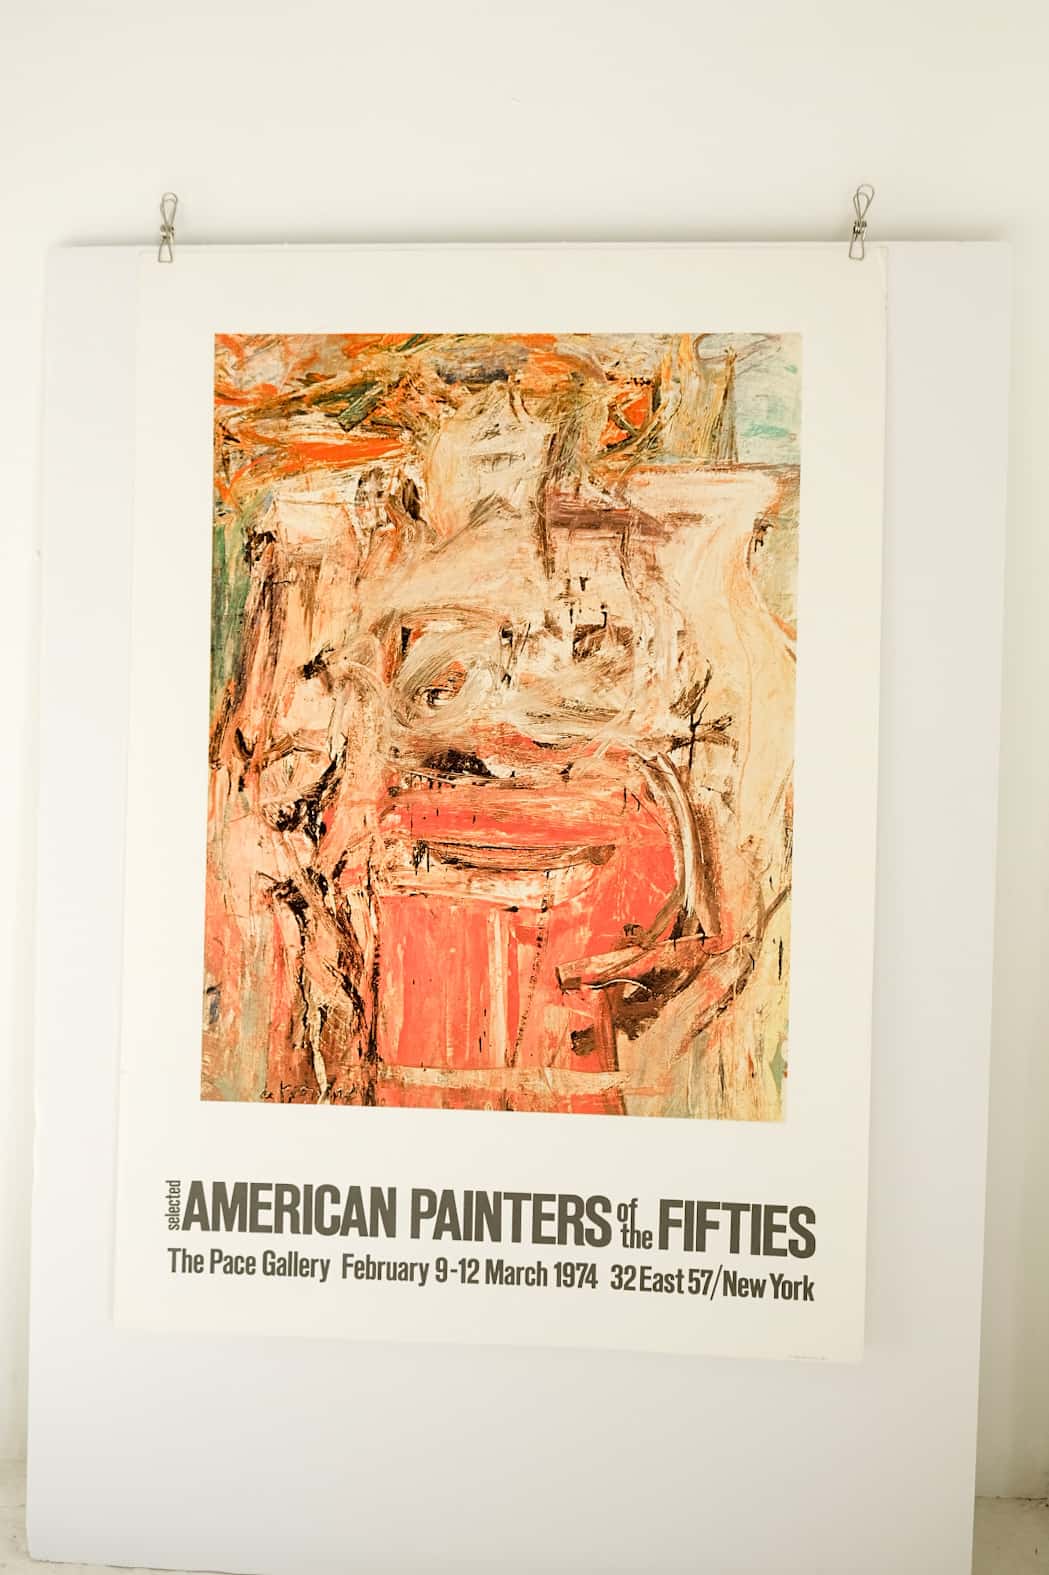 American Painters of the Fifties 1974